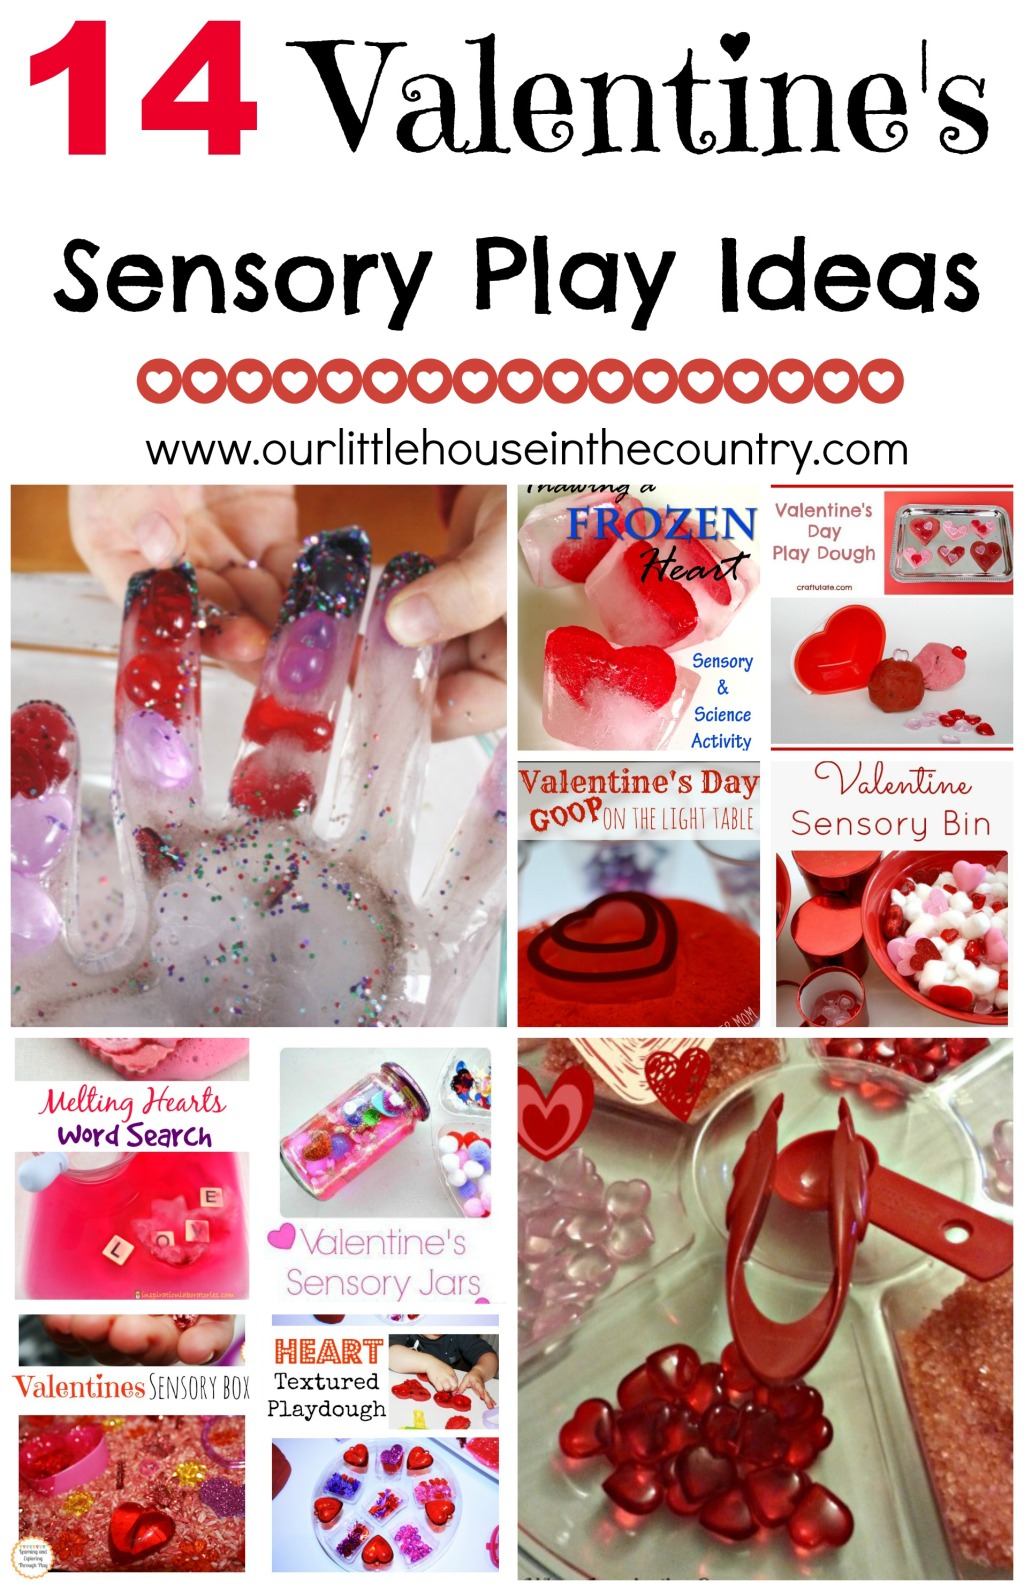 14 Valentines' Day Sensory Play Ideas - Our Little House in the Country